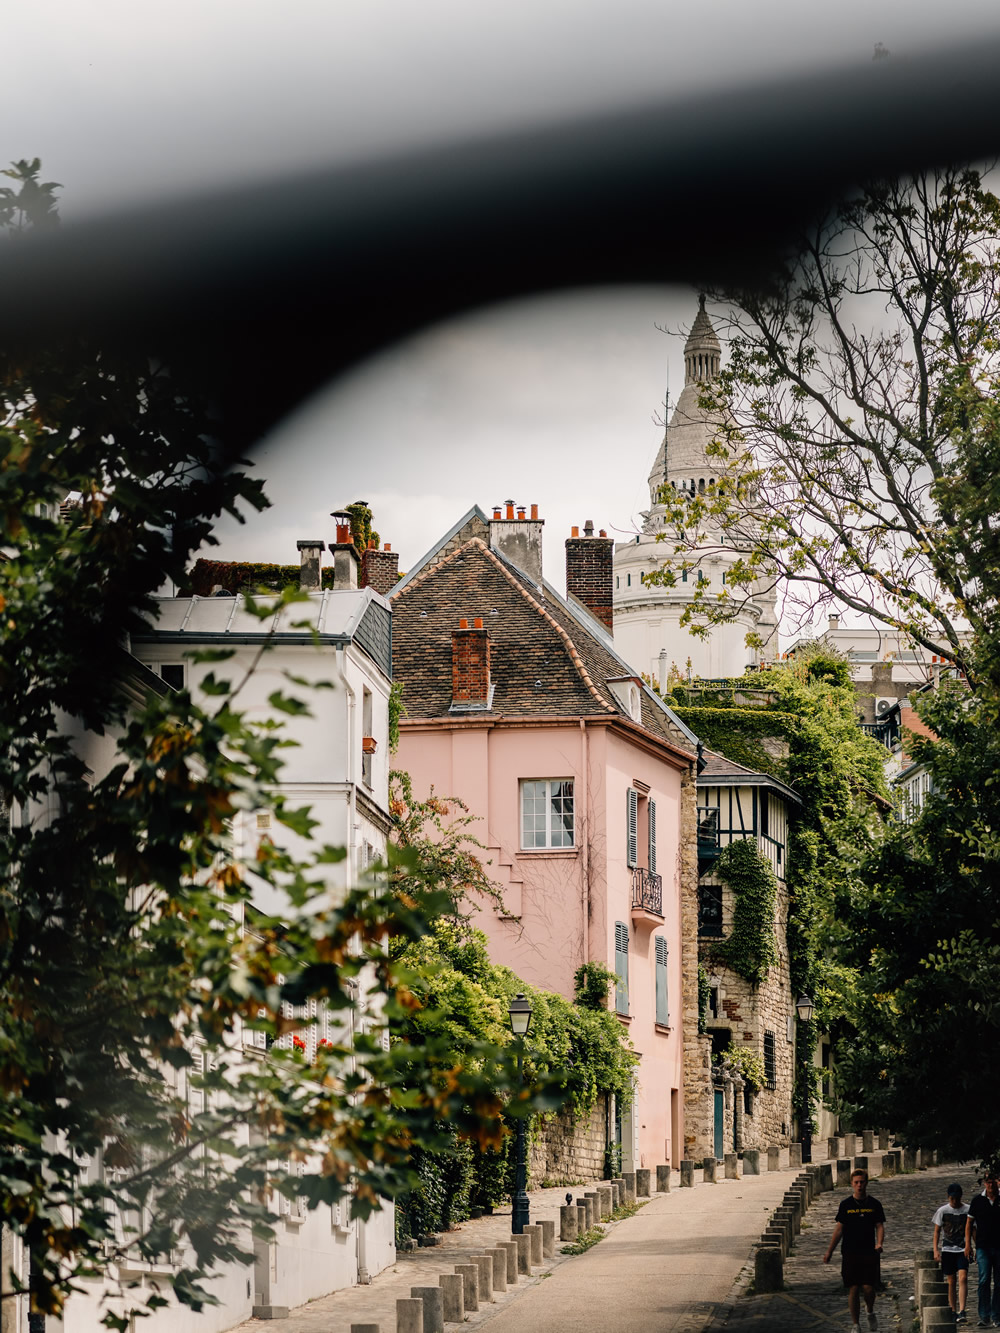 The Montmartre district in Paris is a must-do